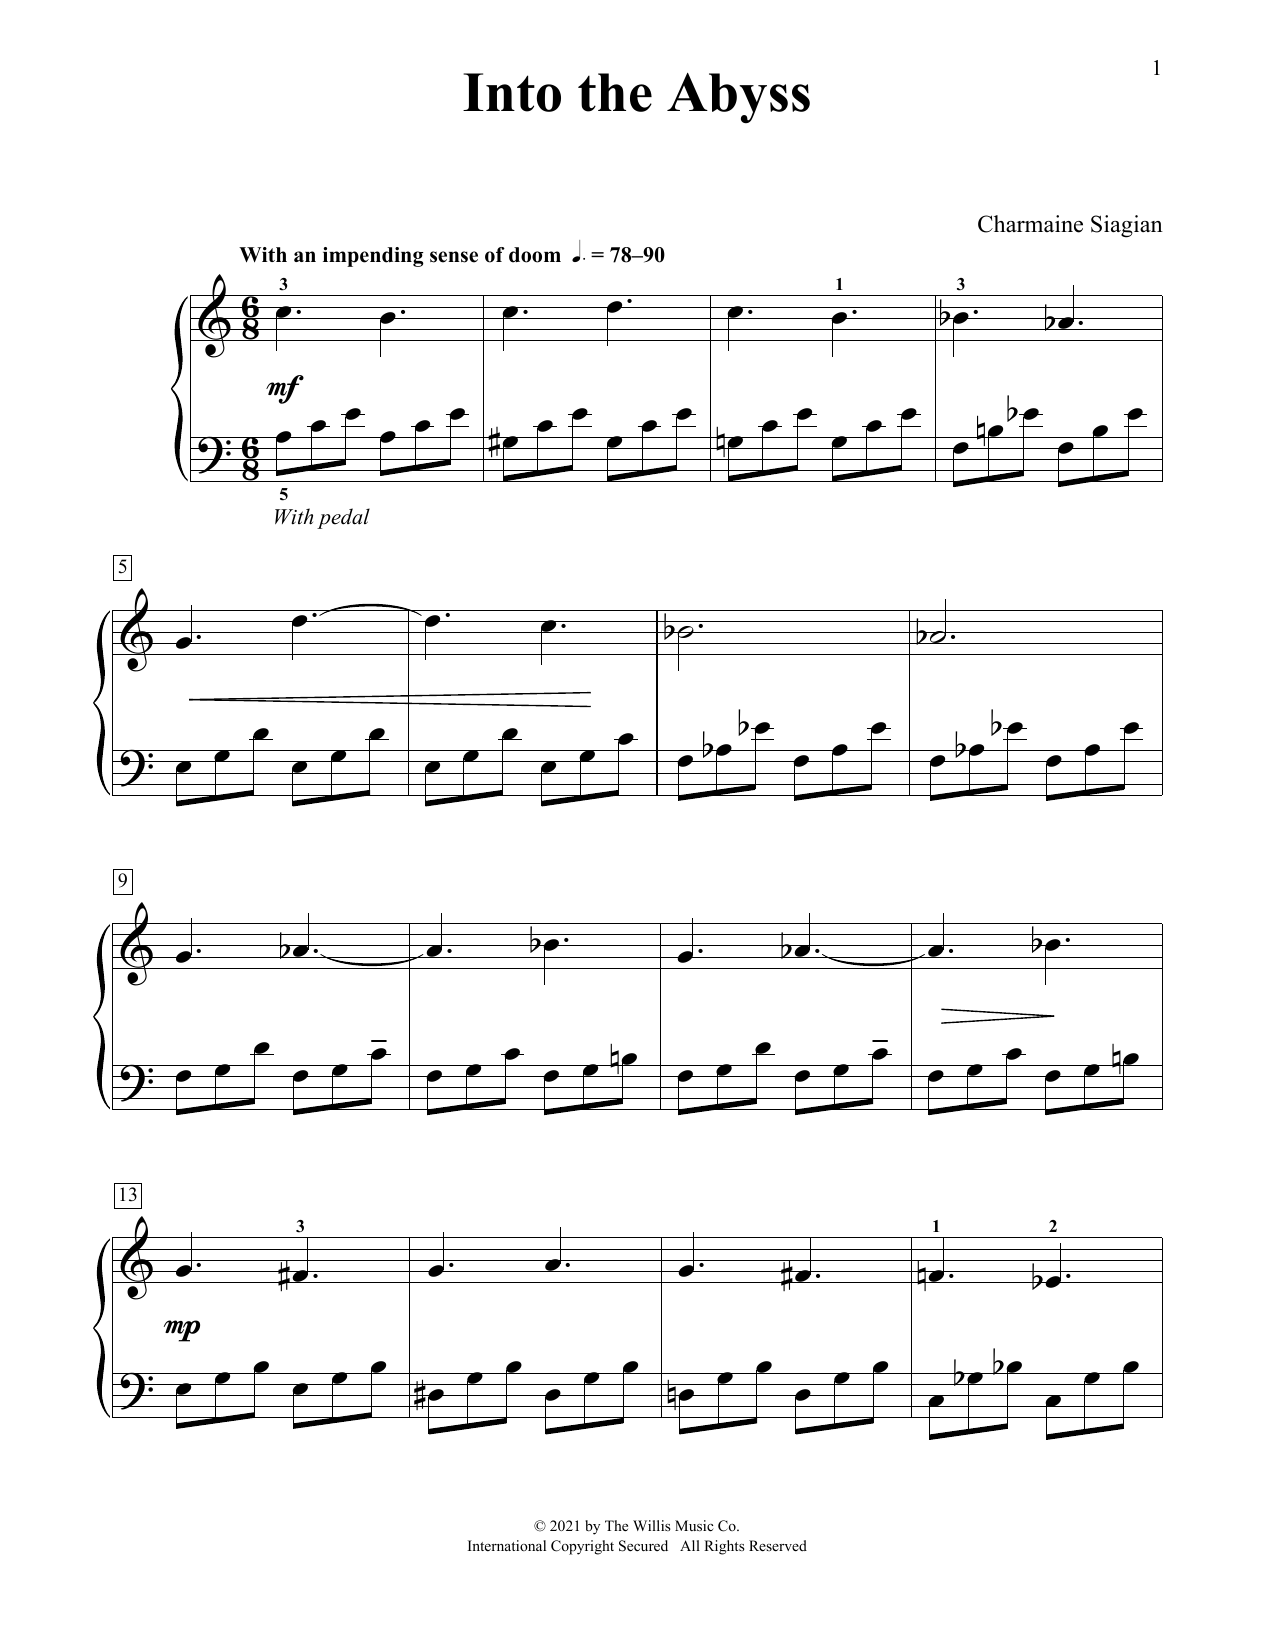 Download Charmaine Siagian Into The Abyss Sheet Music